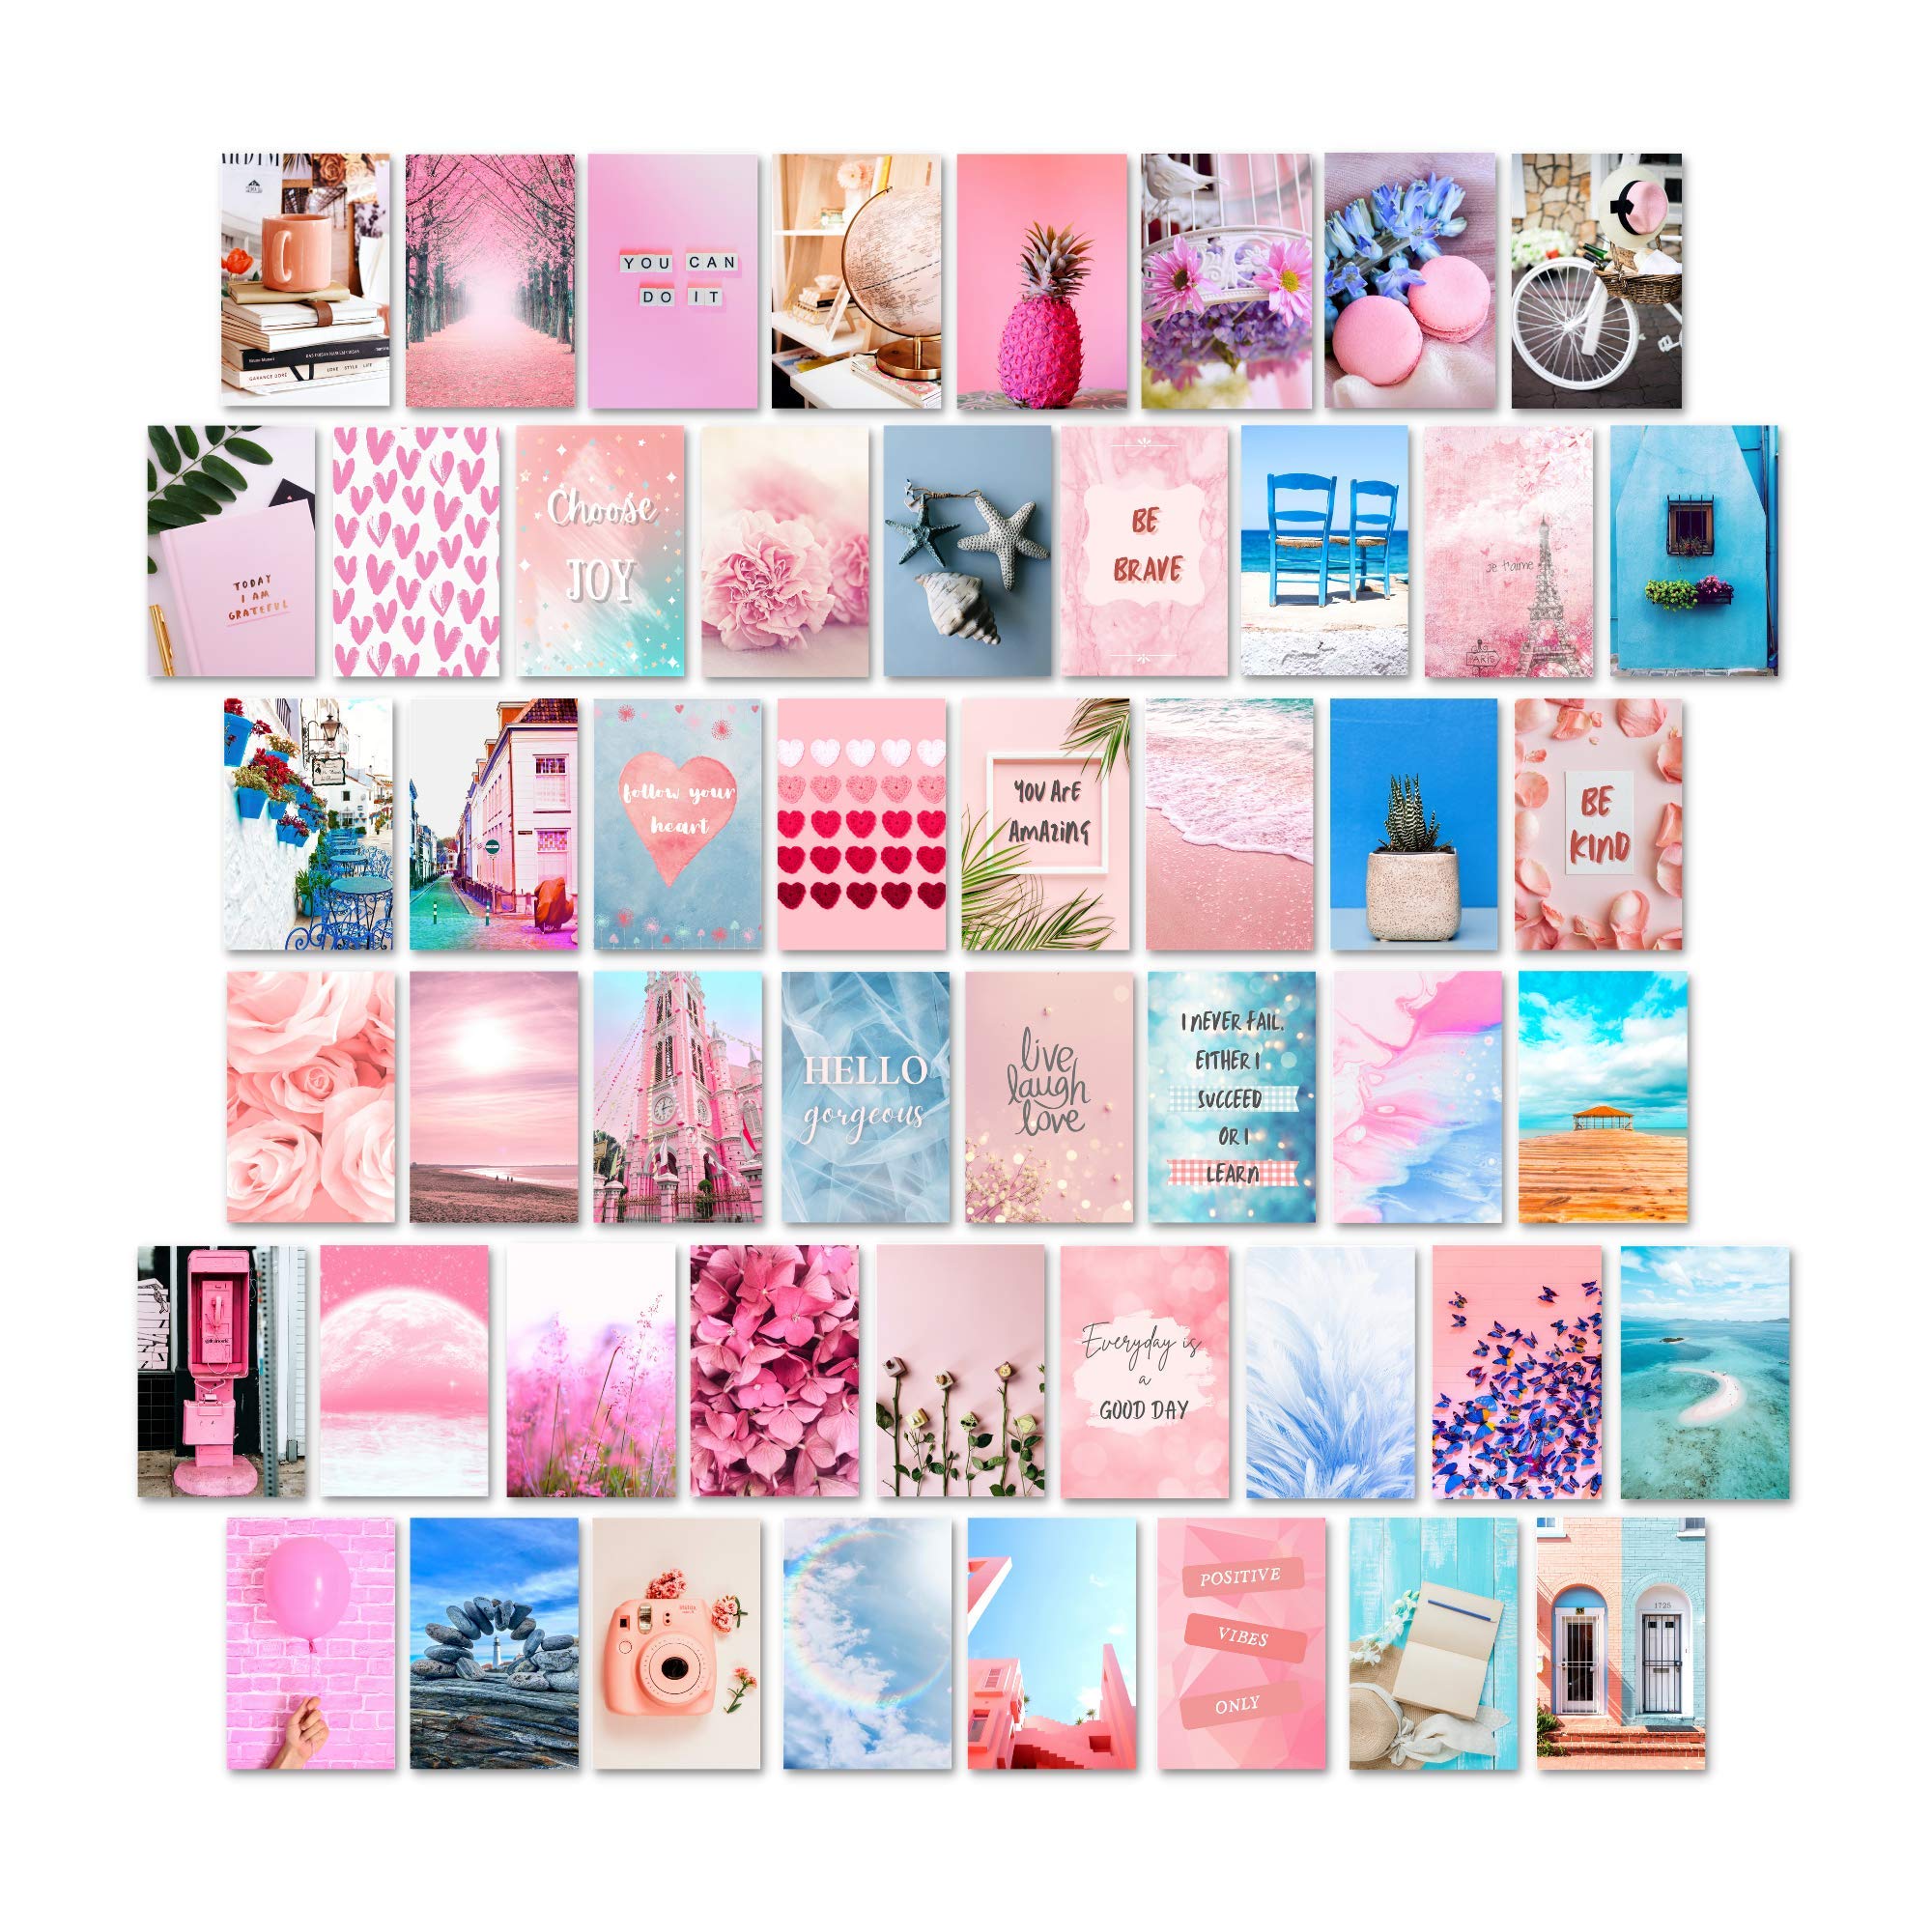 Koozto Wall Collage Kit, 50pcs 4x6 inches Pink and Blue Photo Prints, Cute Aesthetic Picture for Dorm College Wall Art Decorations, Trendy TikTok Room Decor Wallpaper for Teen Girl Bedroom, Pink